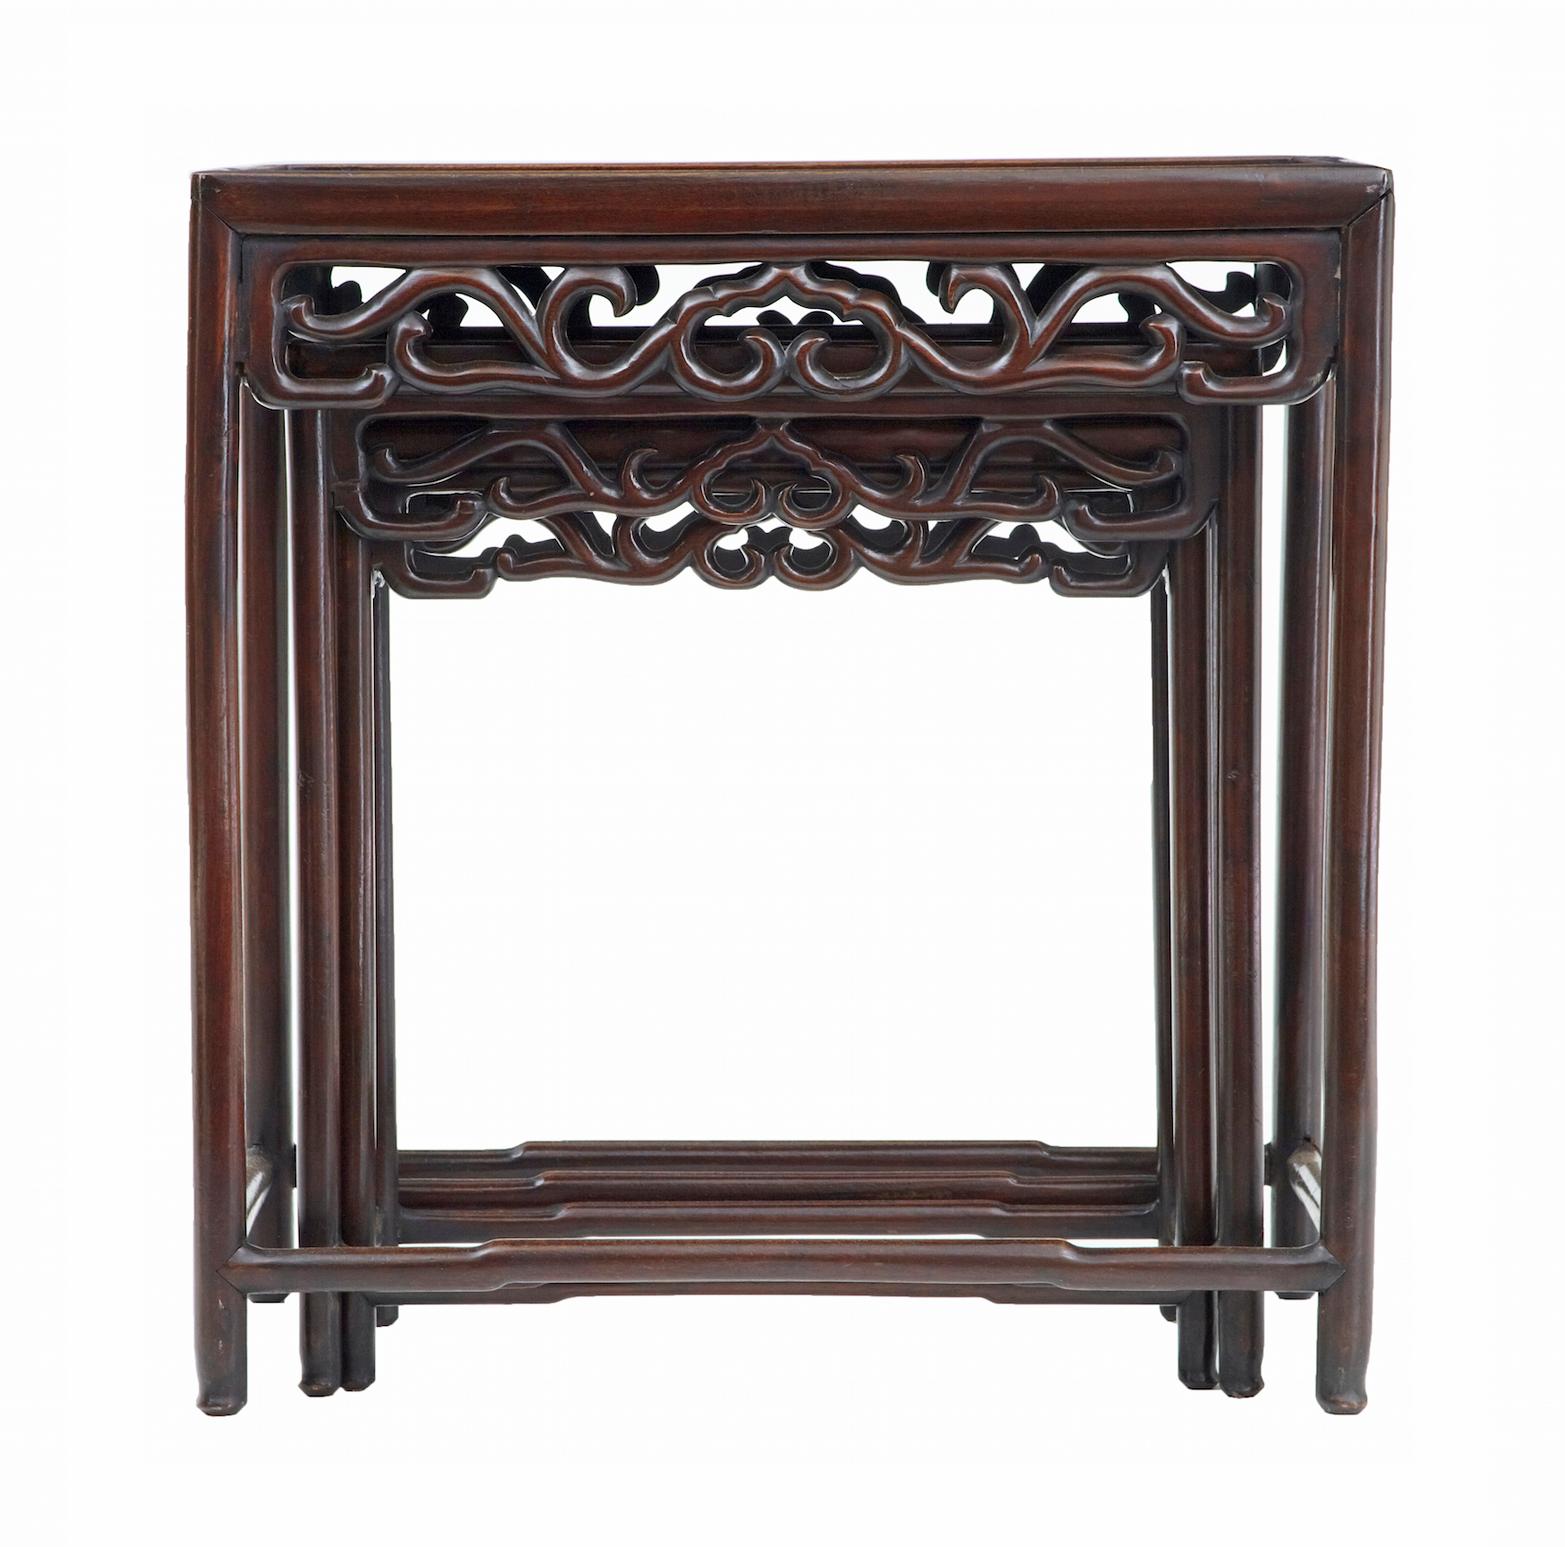 Late 19th century Chinese nest of 3 tables circa 1890.

Good quality set of 3 Chinese tables, circa 1890. Formerly a nest of 4. Good color and patina, similar to rosewood. Nest forms by stacking as opposed to pulling out, ideal for making a set of